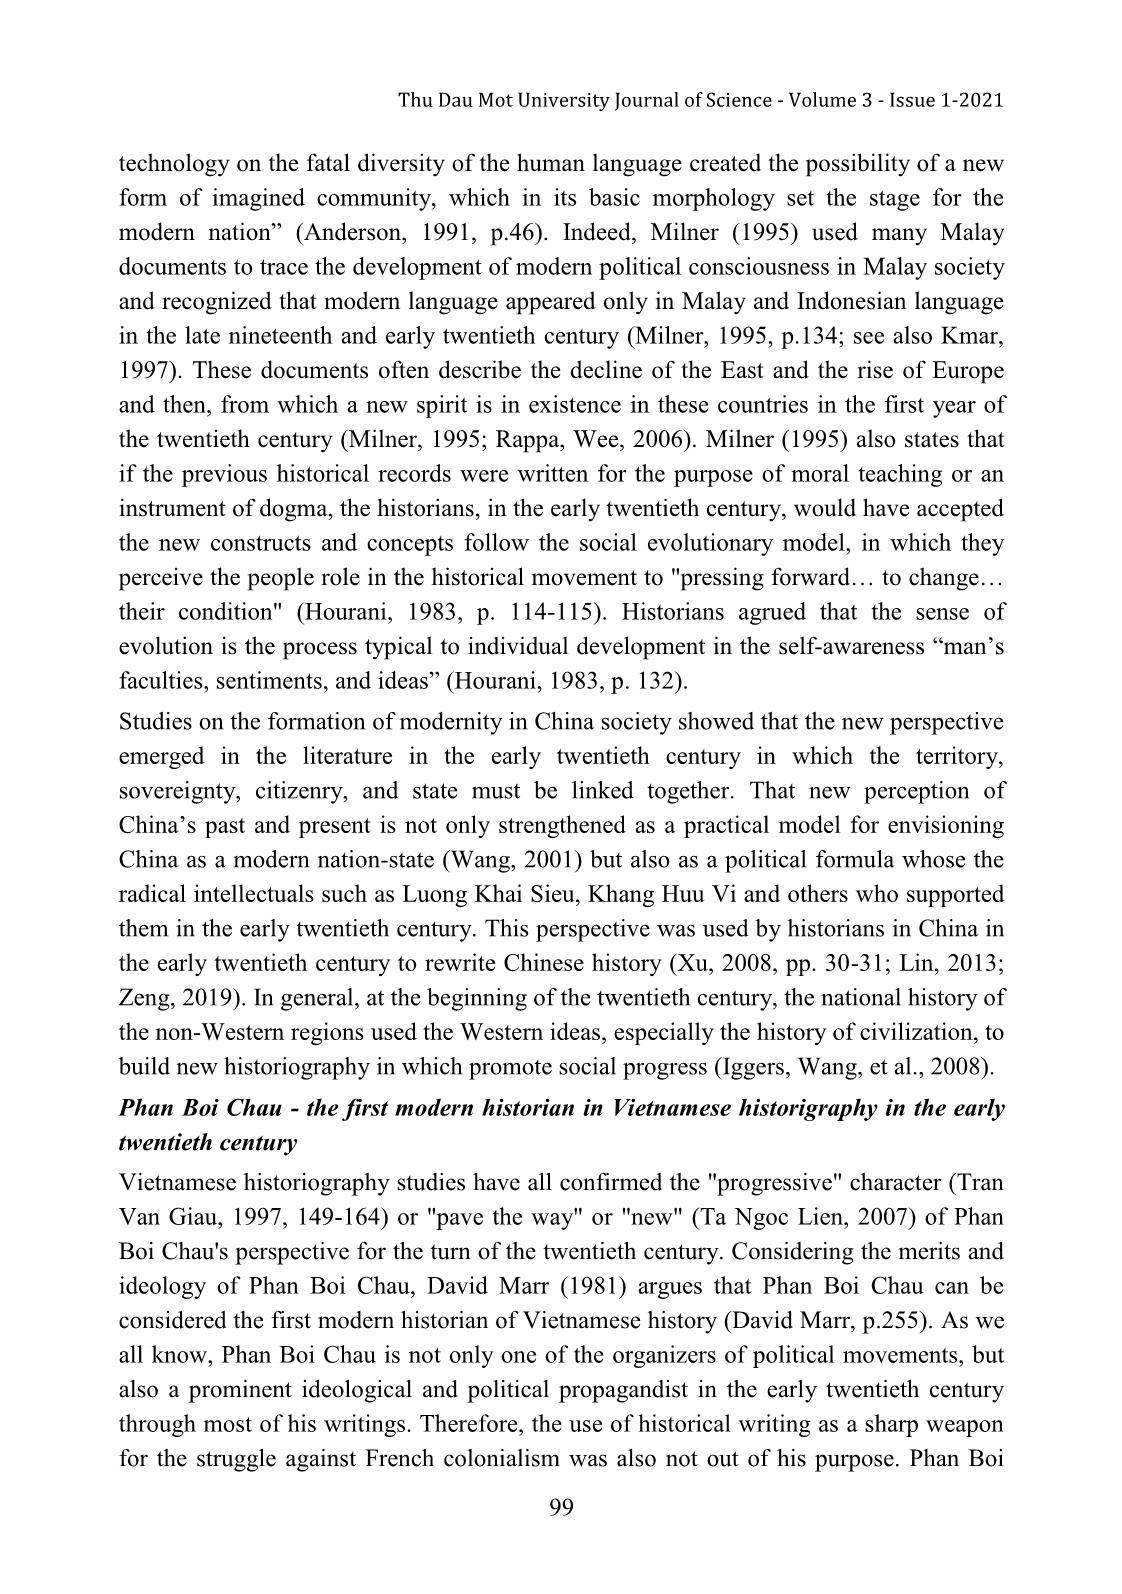 The Shift in historical perception from tradition to modern in Viet Nam in the early twentieth century trang 6